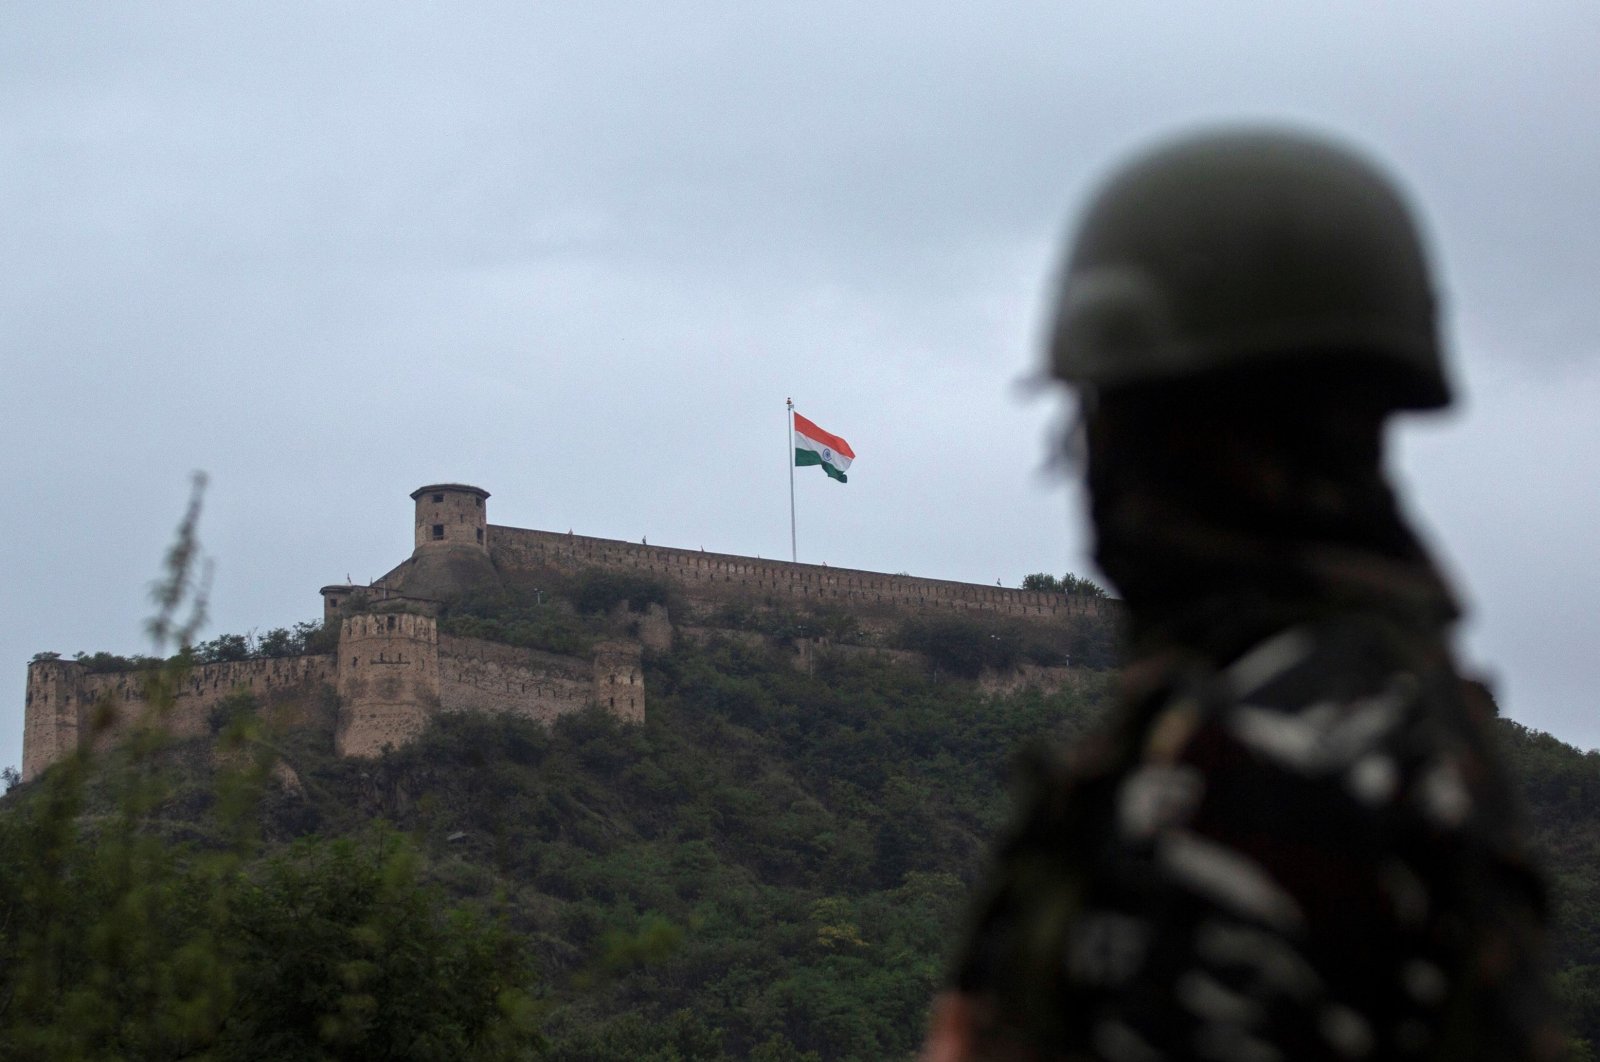 An Indian paramilitary soldier stands guard as the Indian national flag flutters on Hari Parbat Fort during the celebrations to mark India's 75th Independence Day in Srinagar, India, Aug. 15, 2021. (AFP Photo)